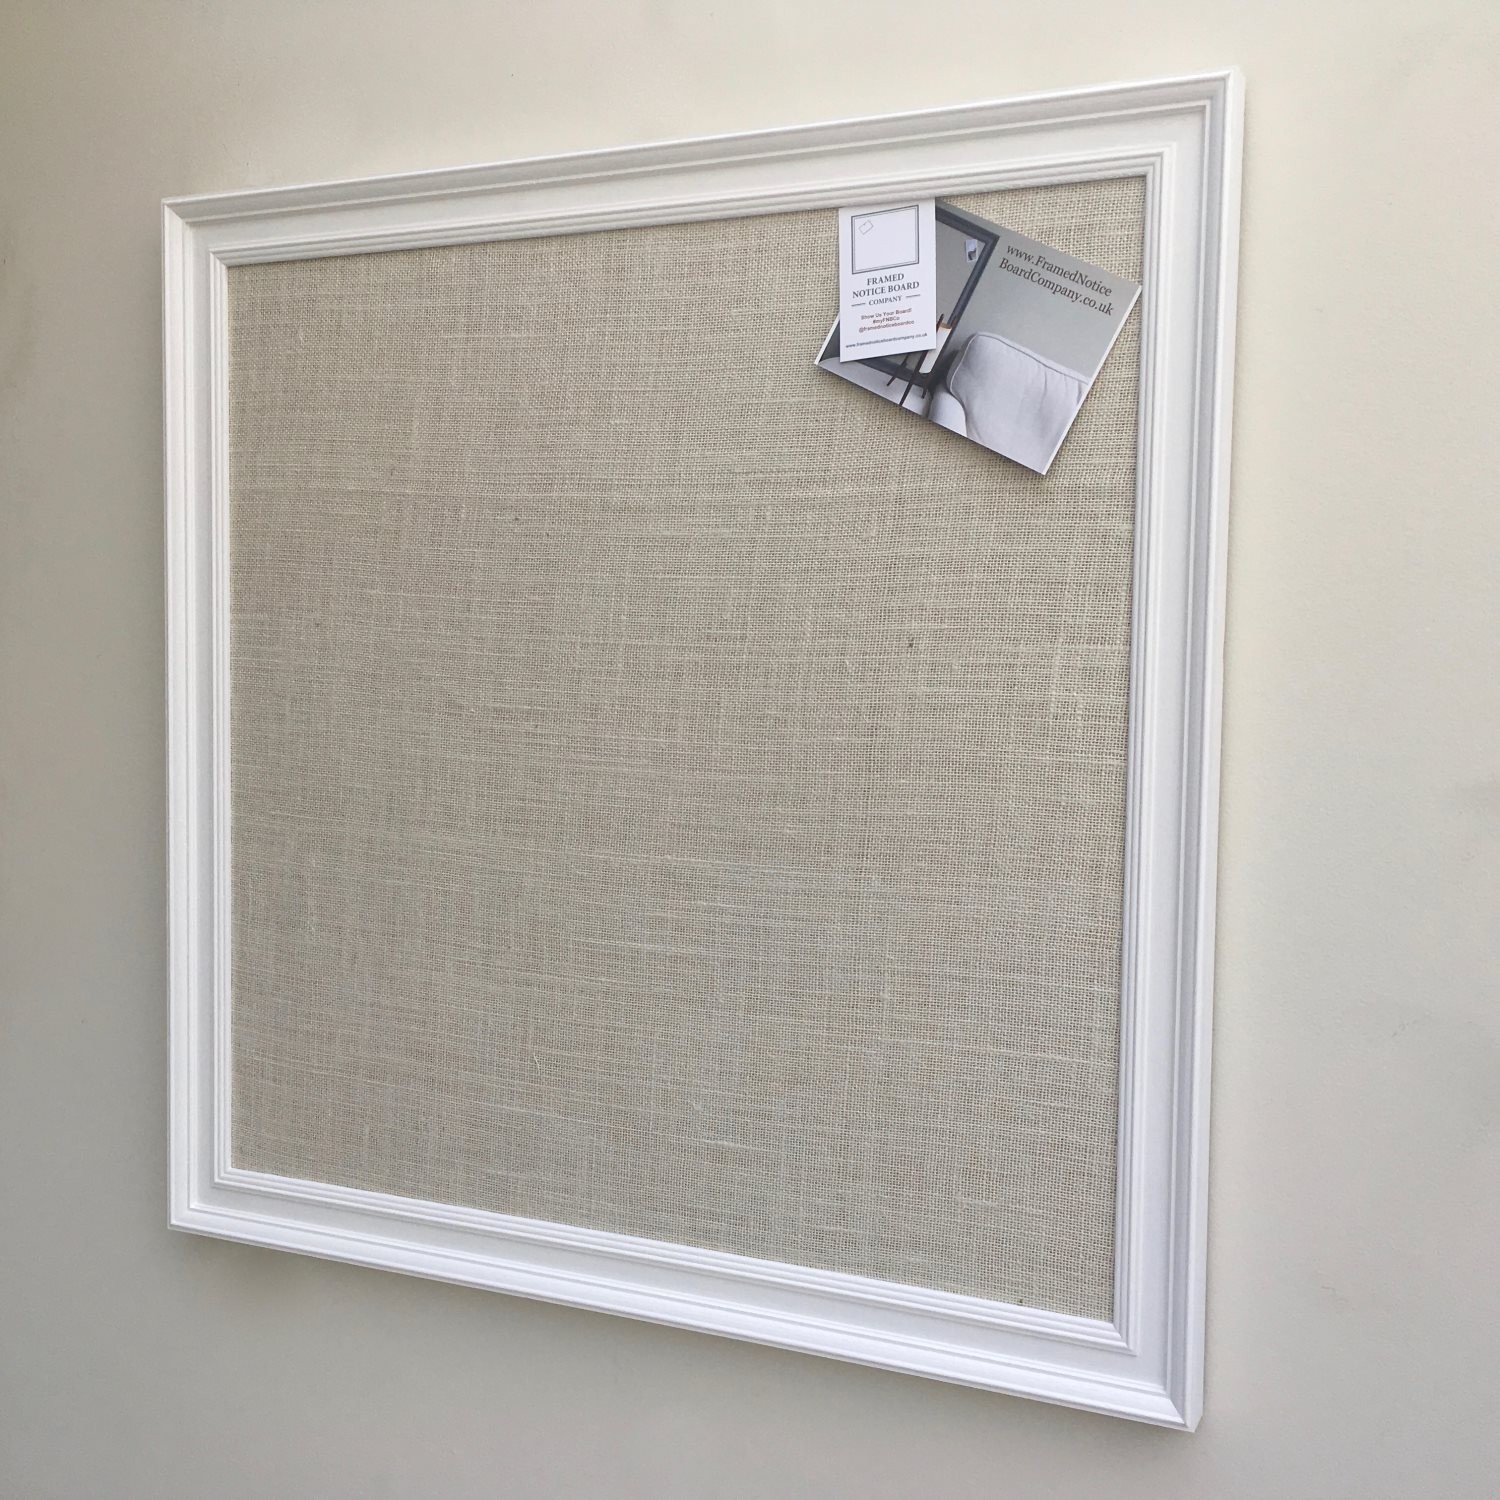 Extra large pin board a fabric notice board with white